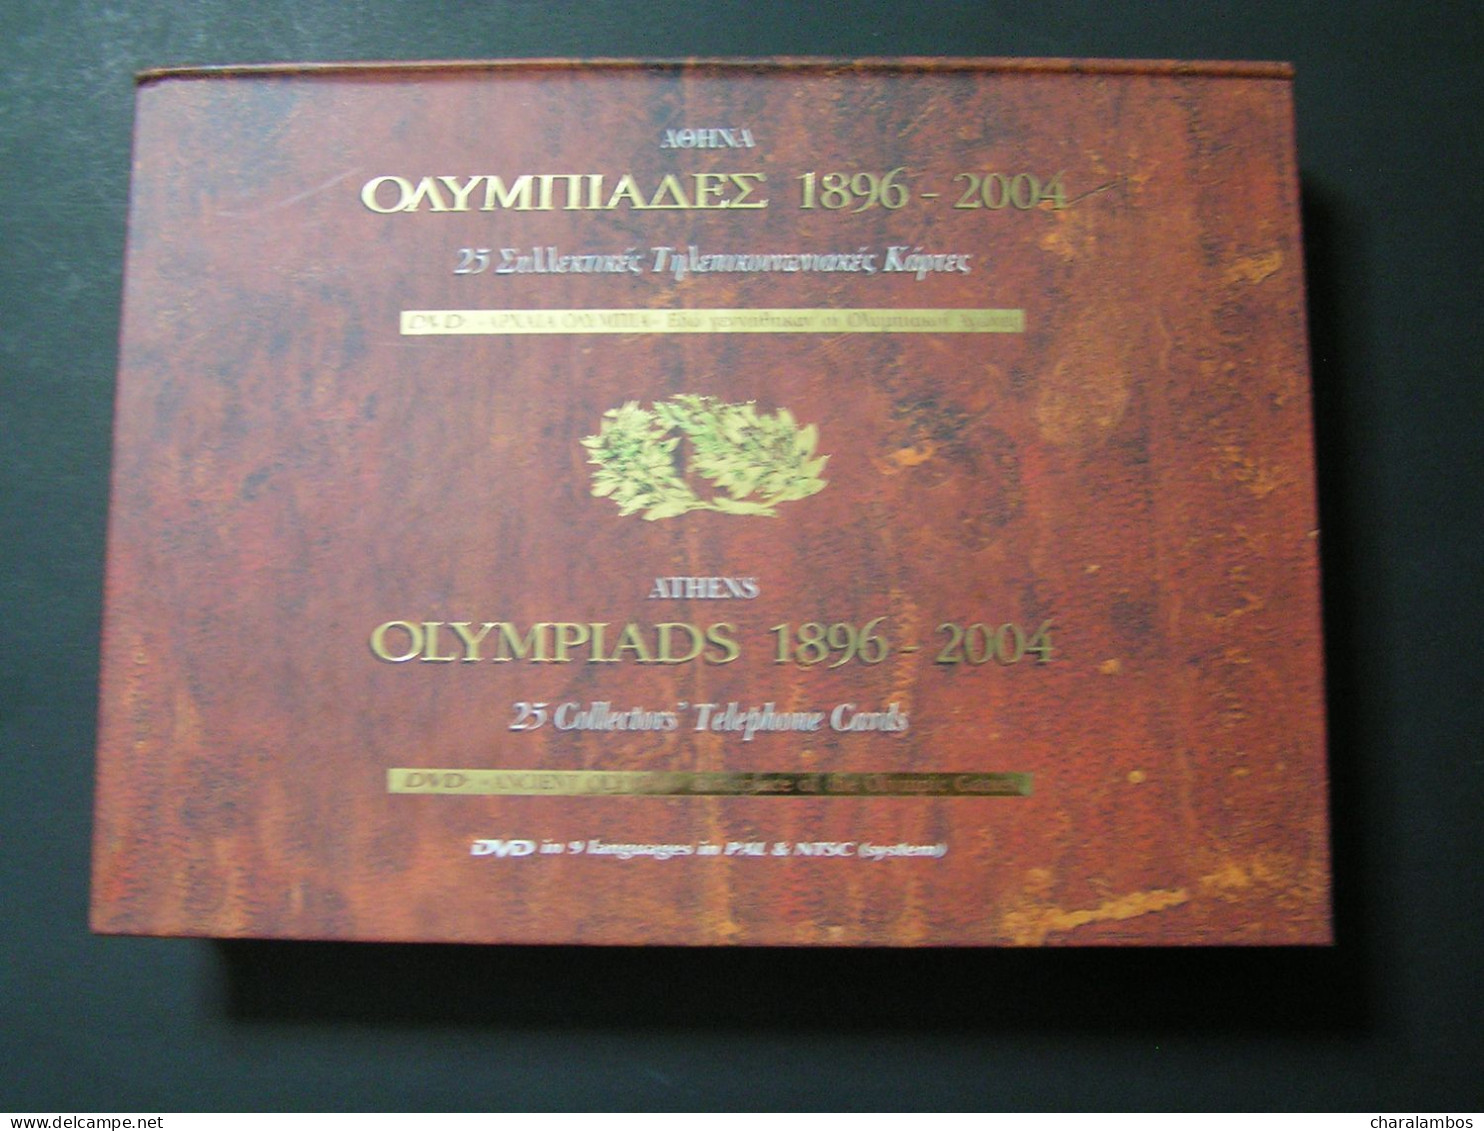 GREECE OLYMPIADS 1896-2004 25 Collectors Telephone Cards DVD ANCIENT OLYMPIA birthplace of the Olympic Games Folder mind